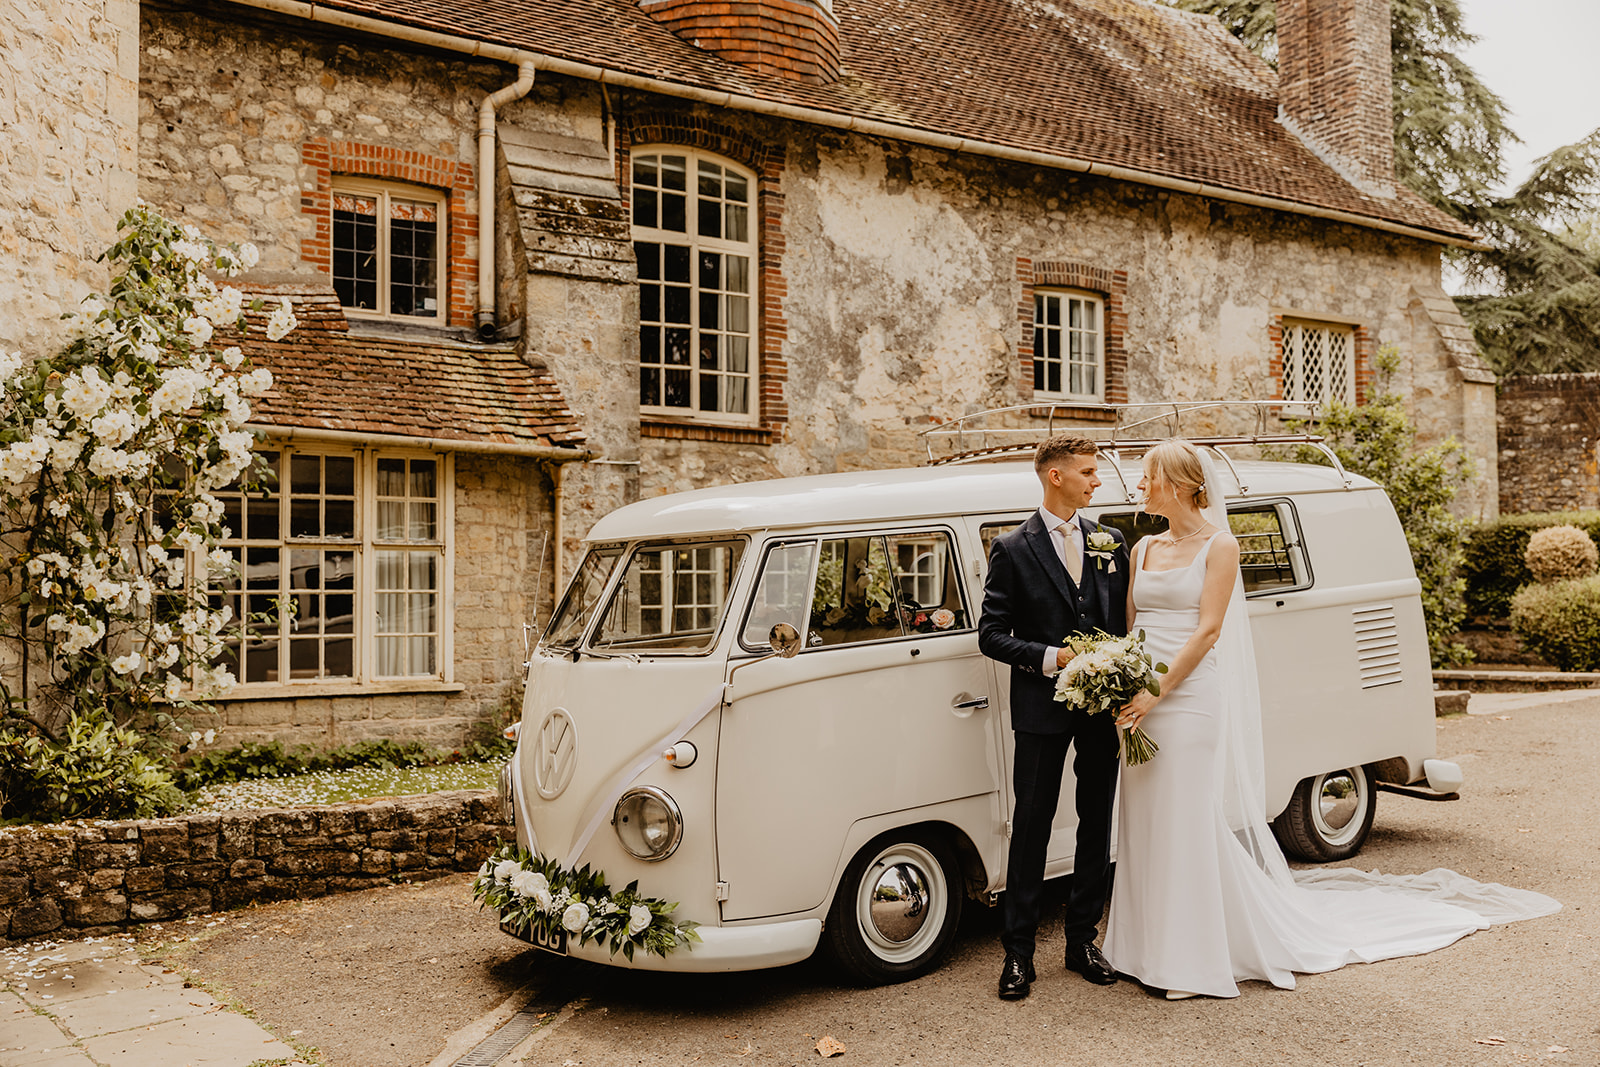 Bride and groom by VW camper at a Bury Manor Barn Wedding in Sussex. Photographer OliveJoy Photography.